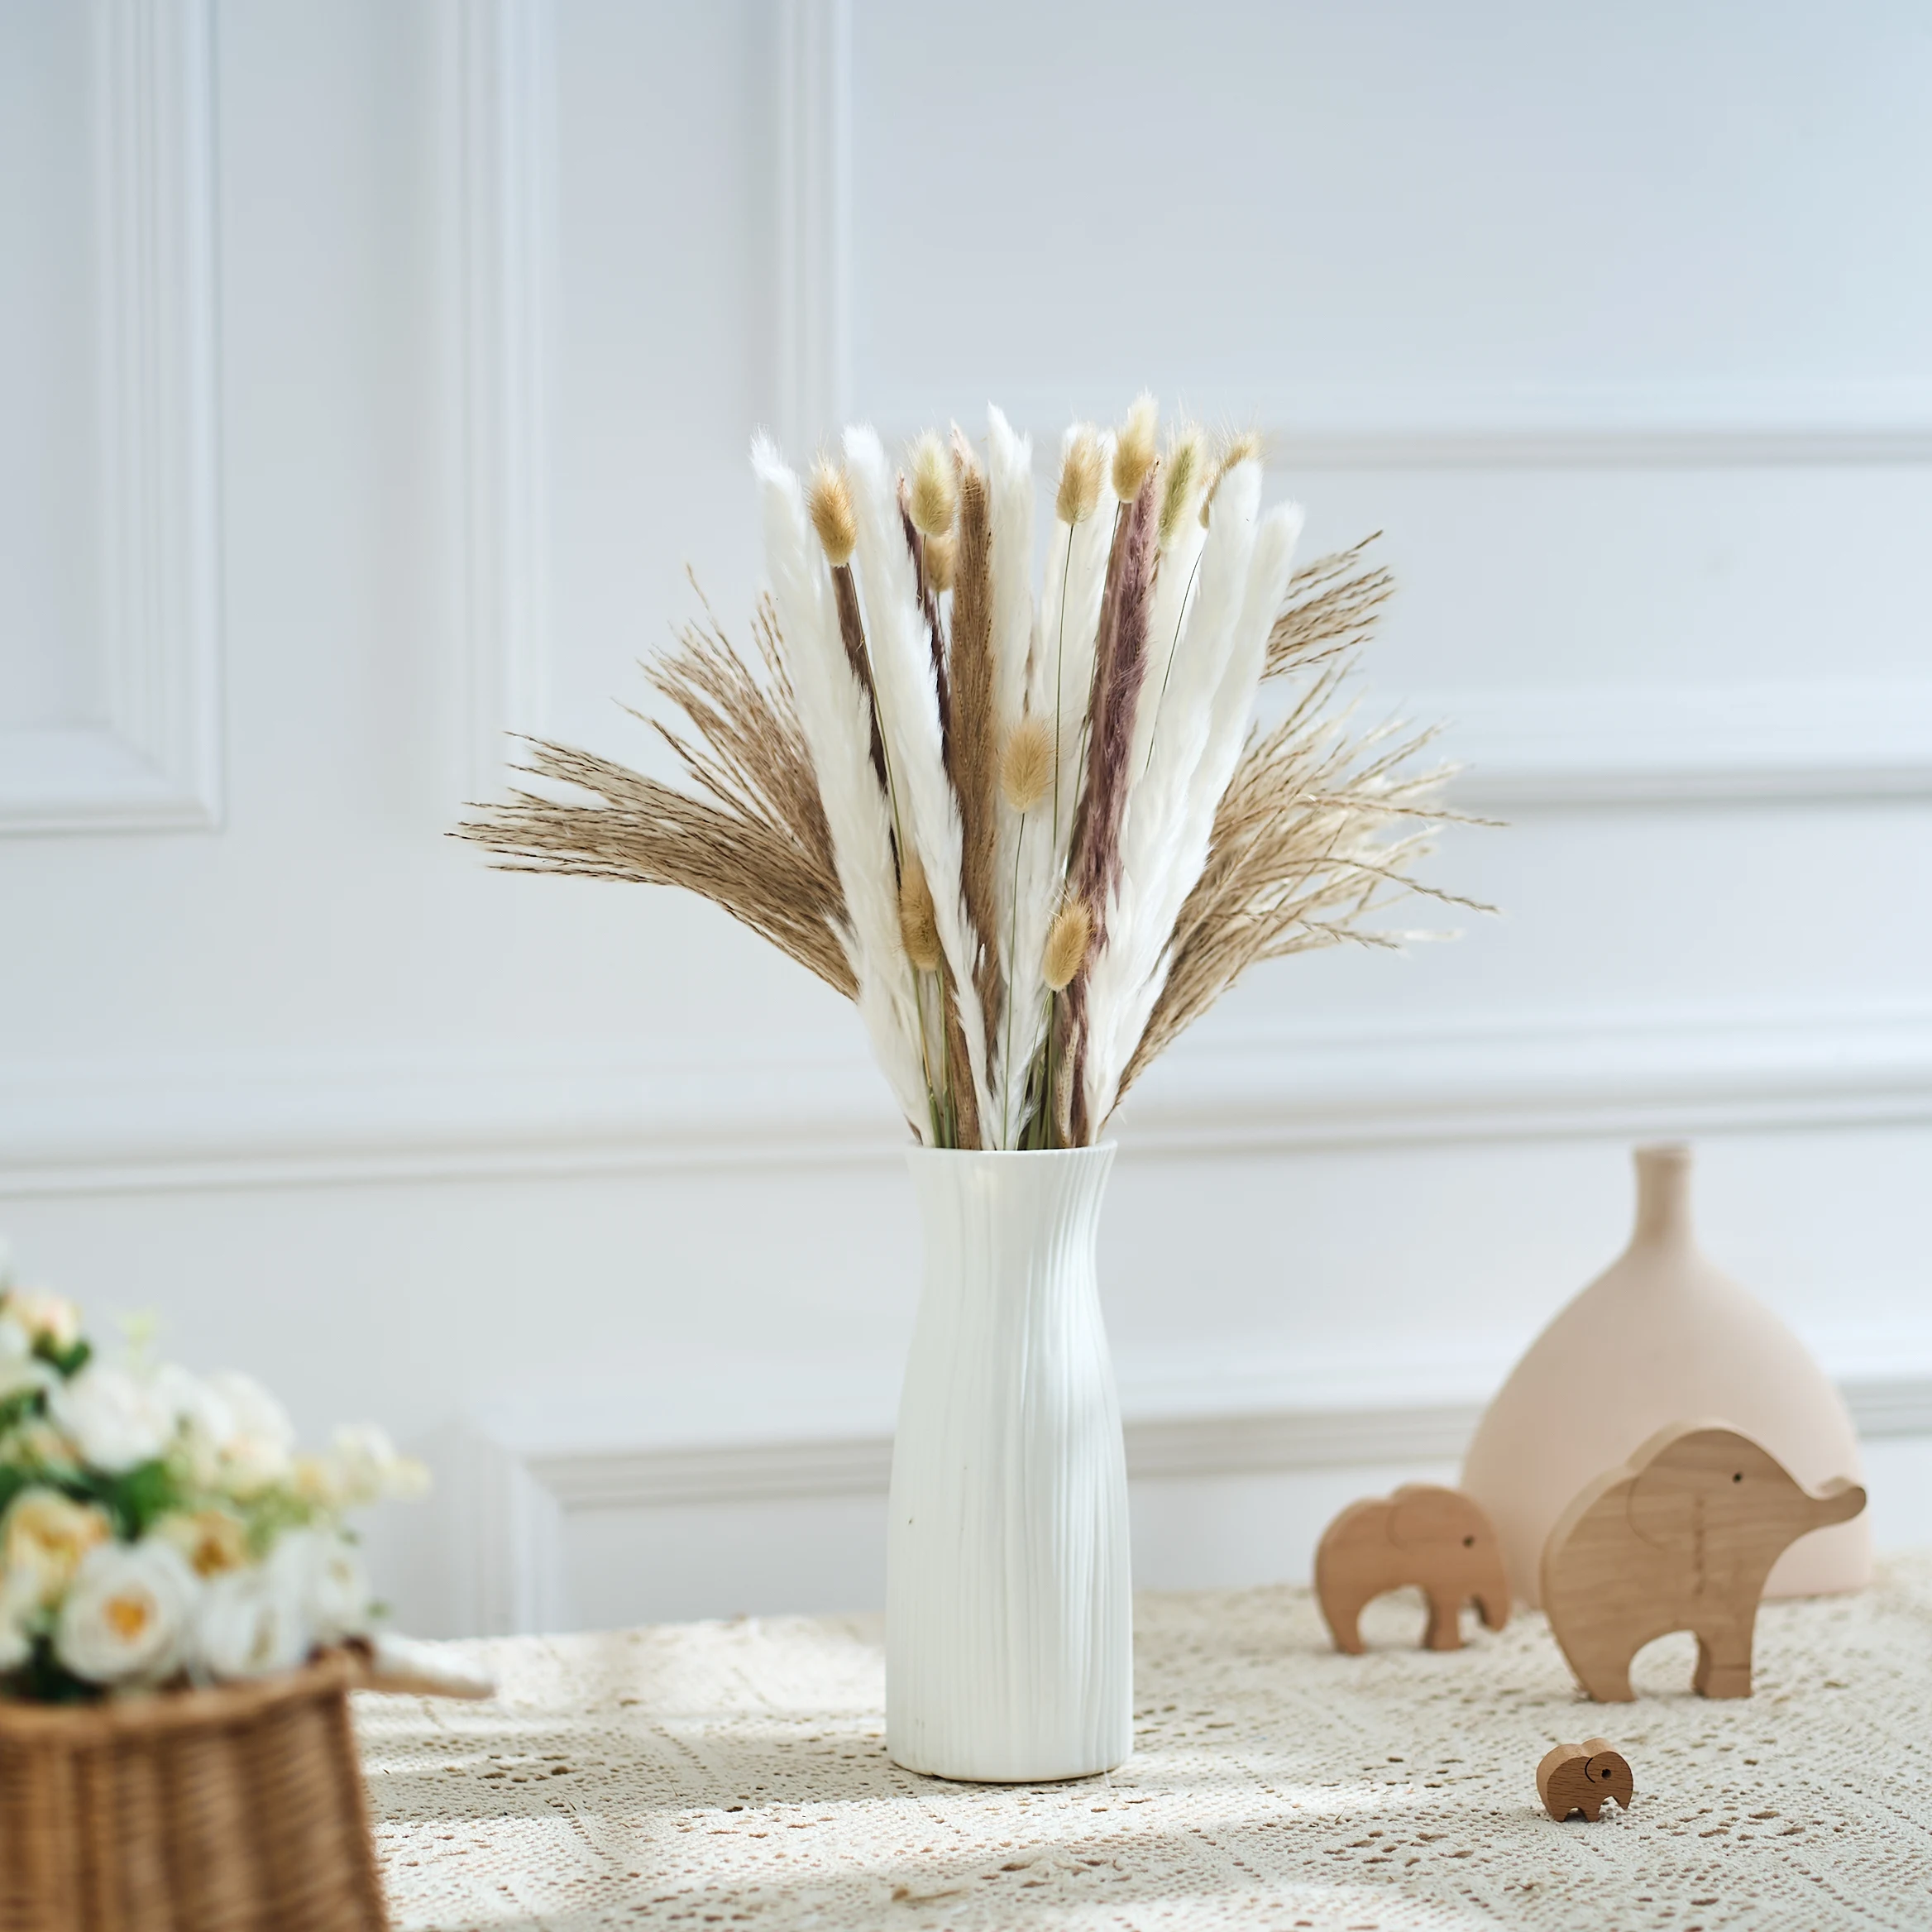 

40PCS Reed Rabbit Tails Grass Natural Pampas Mix Dried Flowers Bouquet Home Christmas Decoration Artifical Flower Wedding Layout